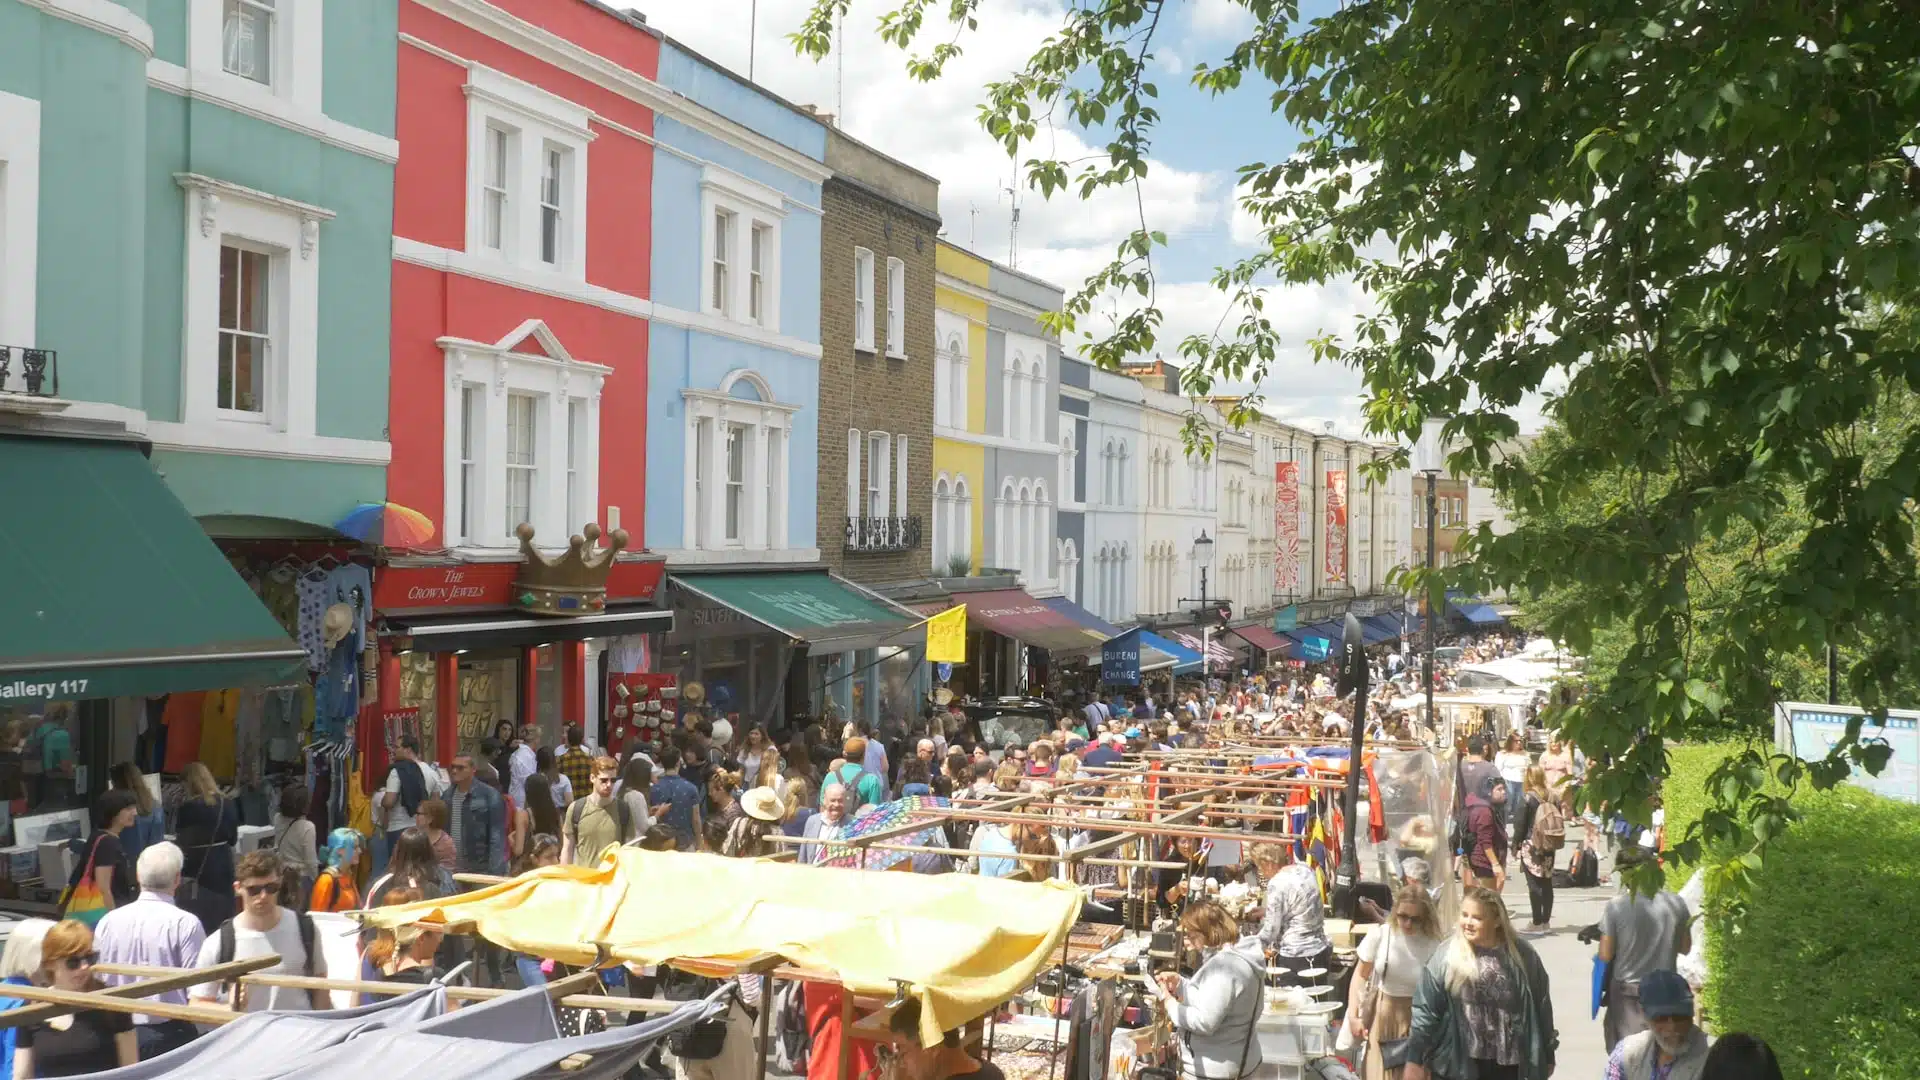 Busy crowds at Portobello Market located in Notting Hill, London 